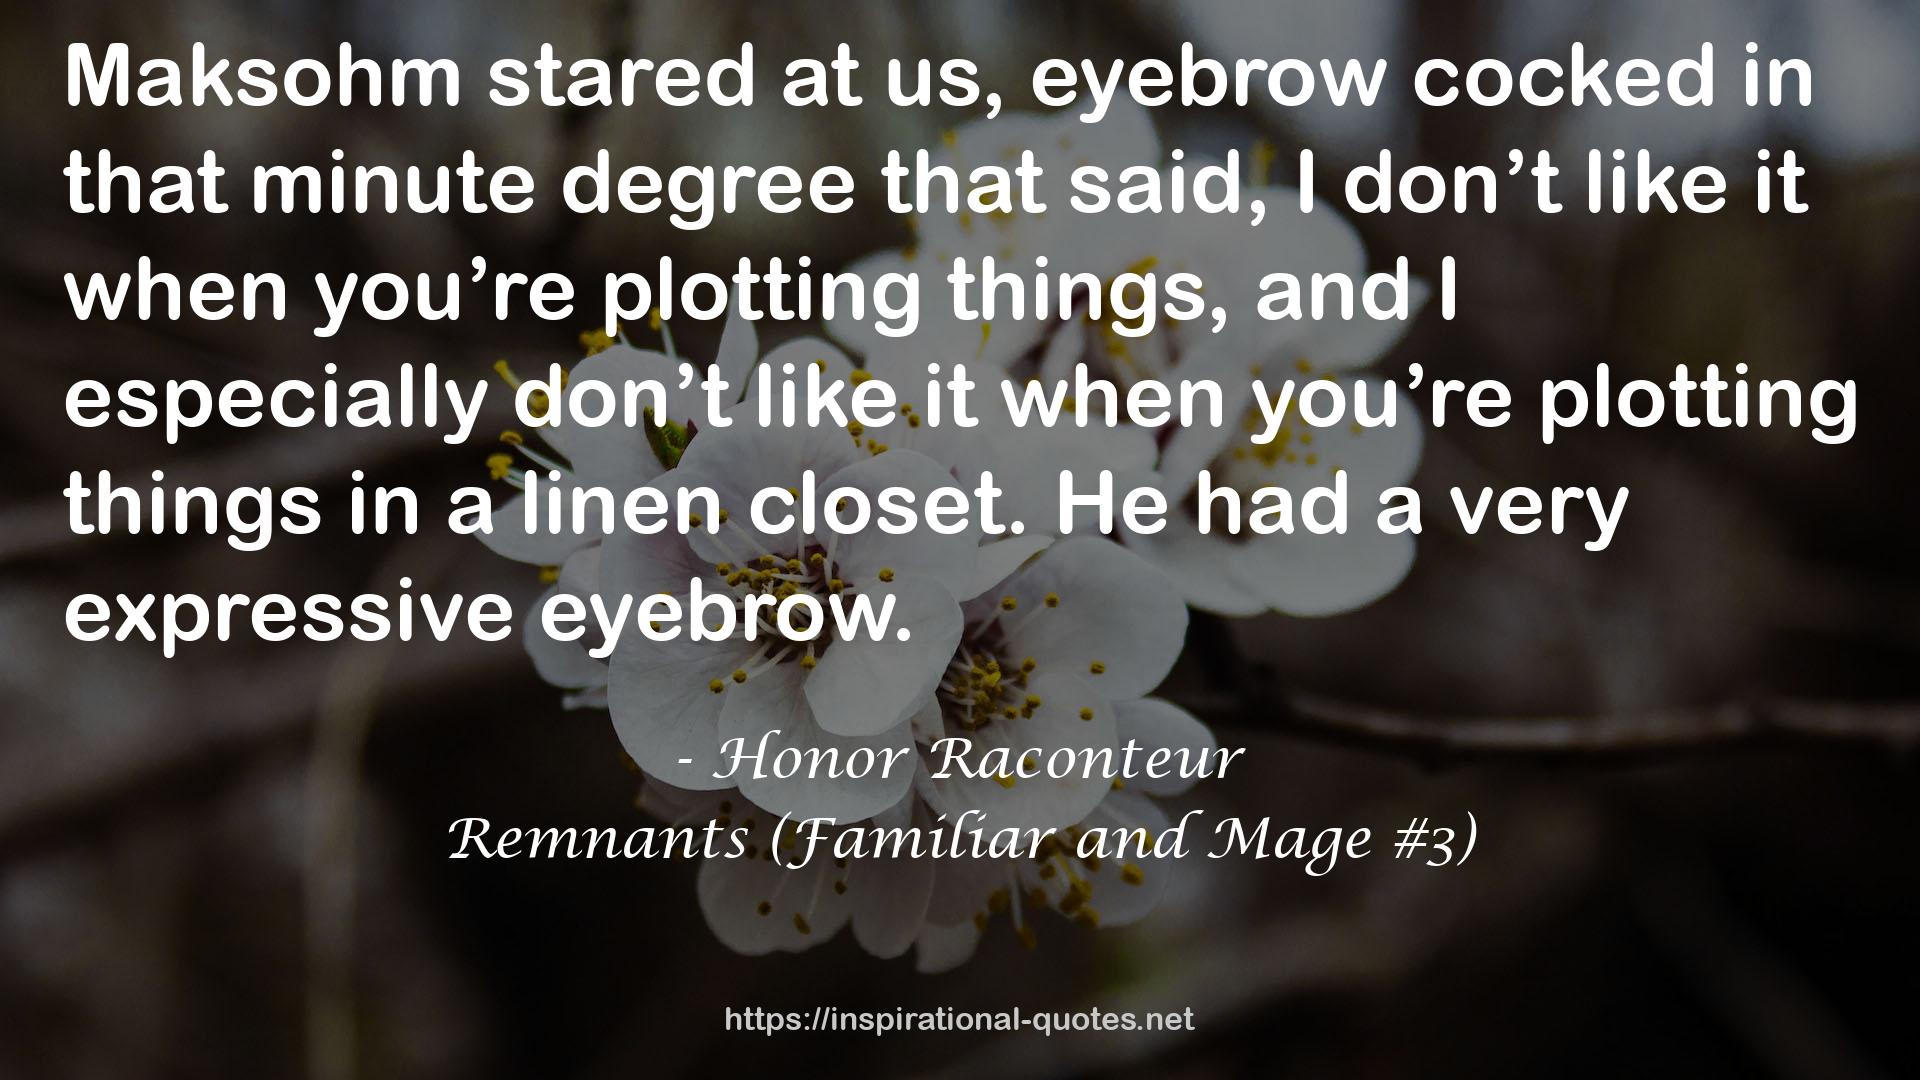 Remnants (Familiar and Mage #3) QUOTES